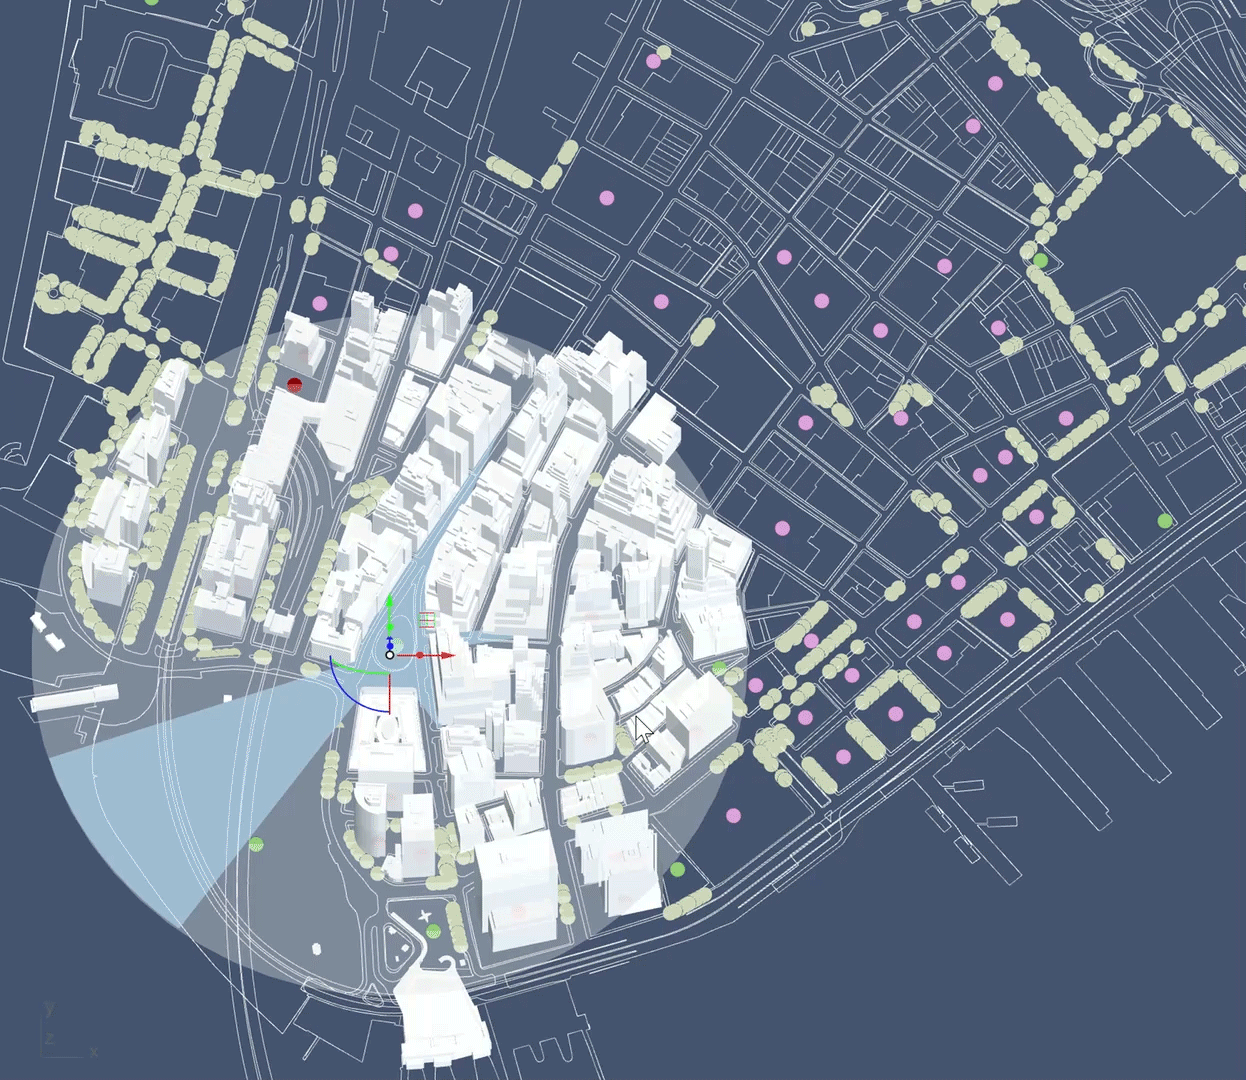 Tutorial 3 — Working with Spatial Data in Grasshopper | by Richard Chou |  Data Mining the City 2022 | Medium